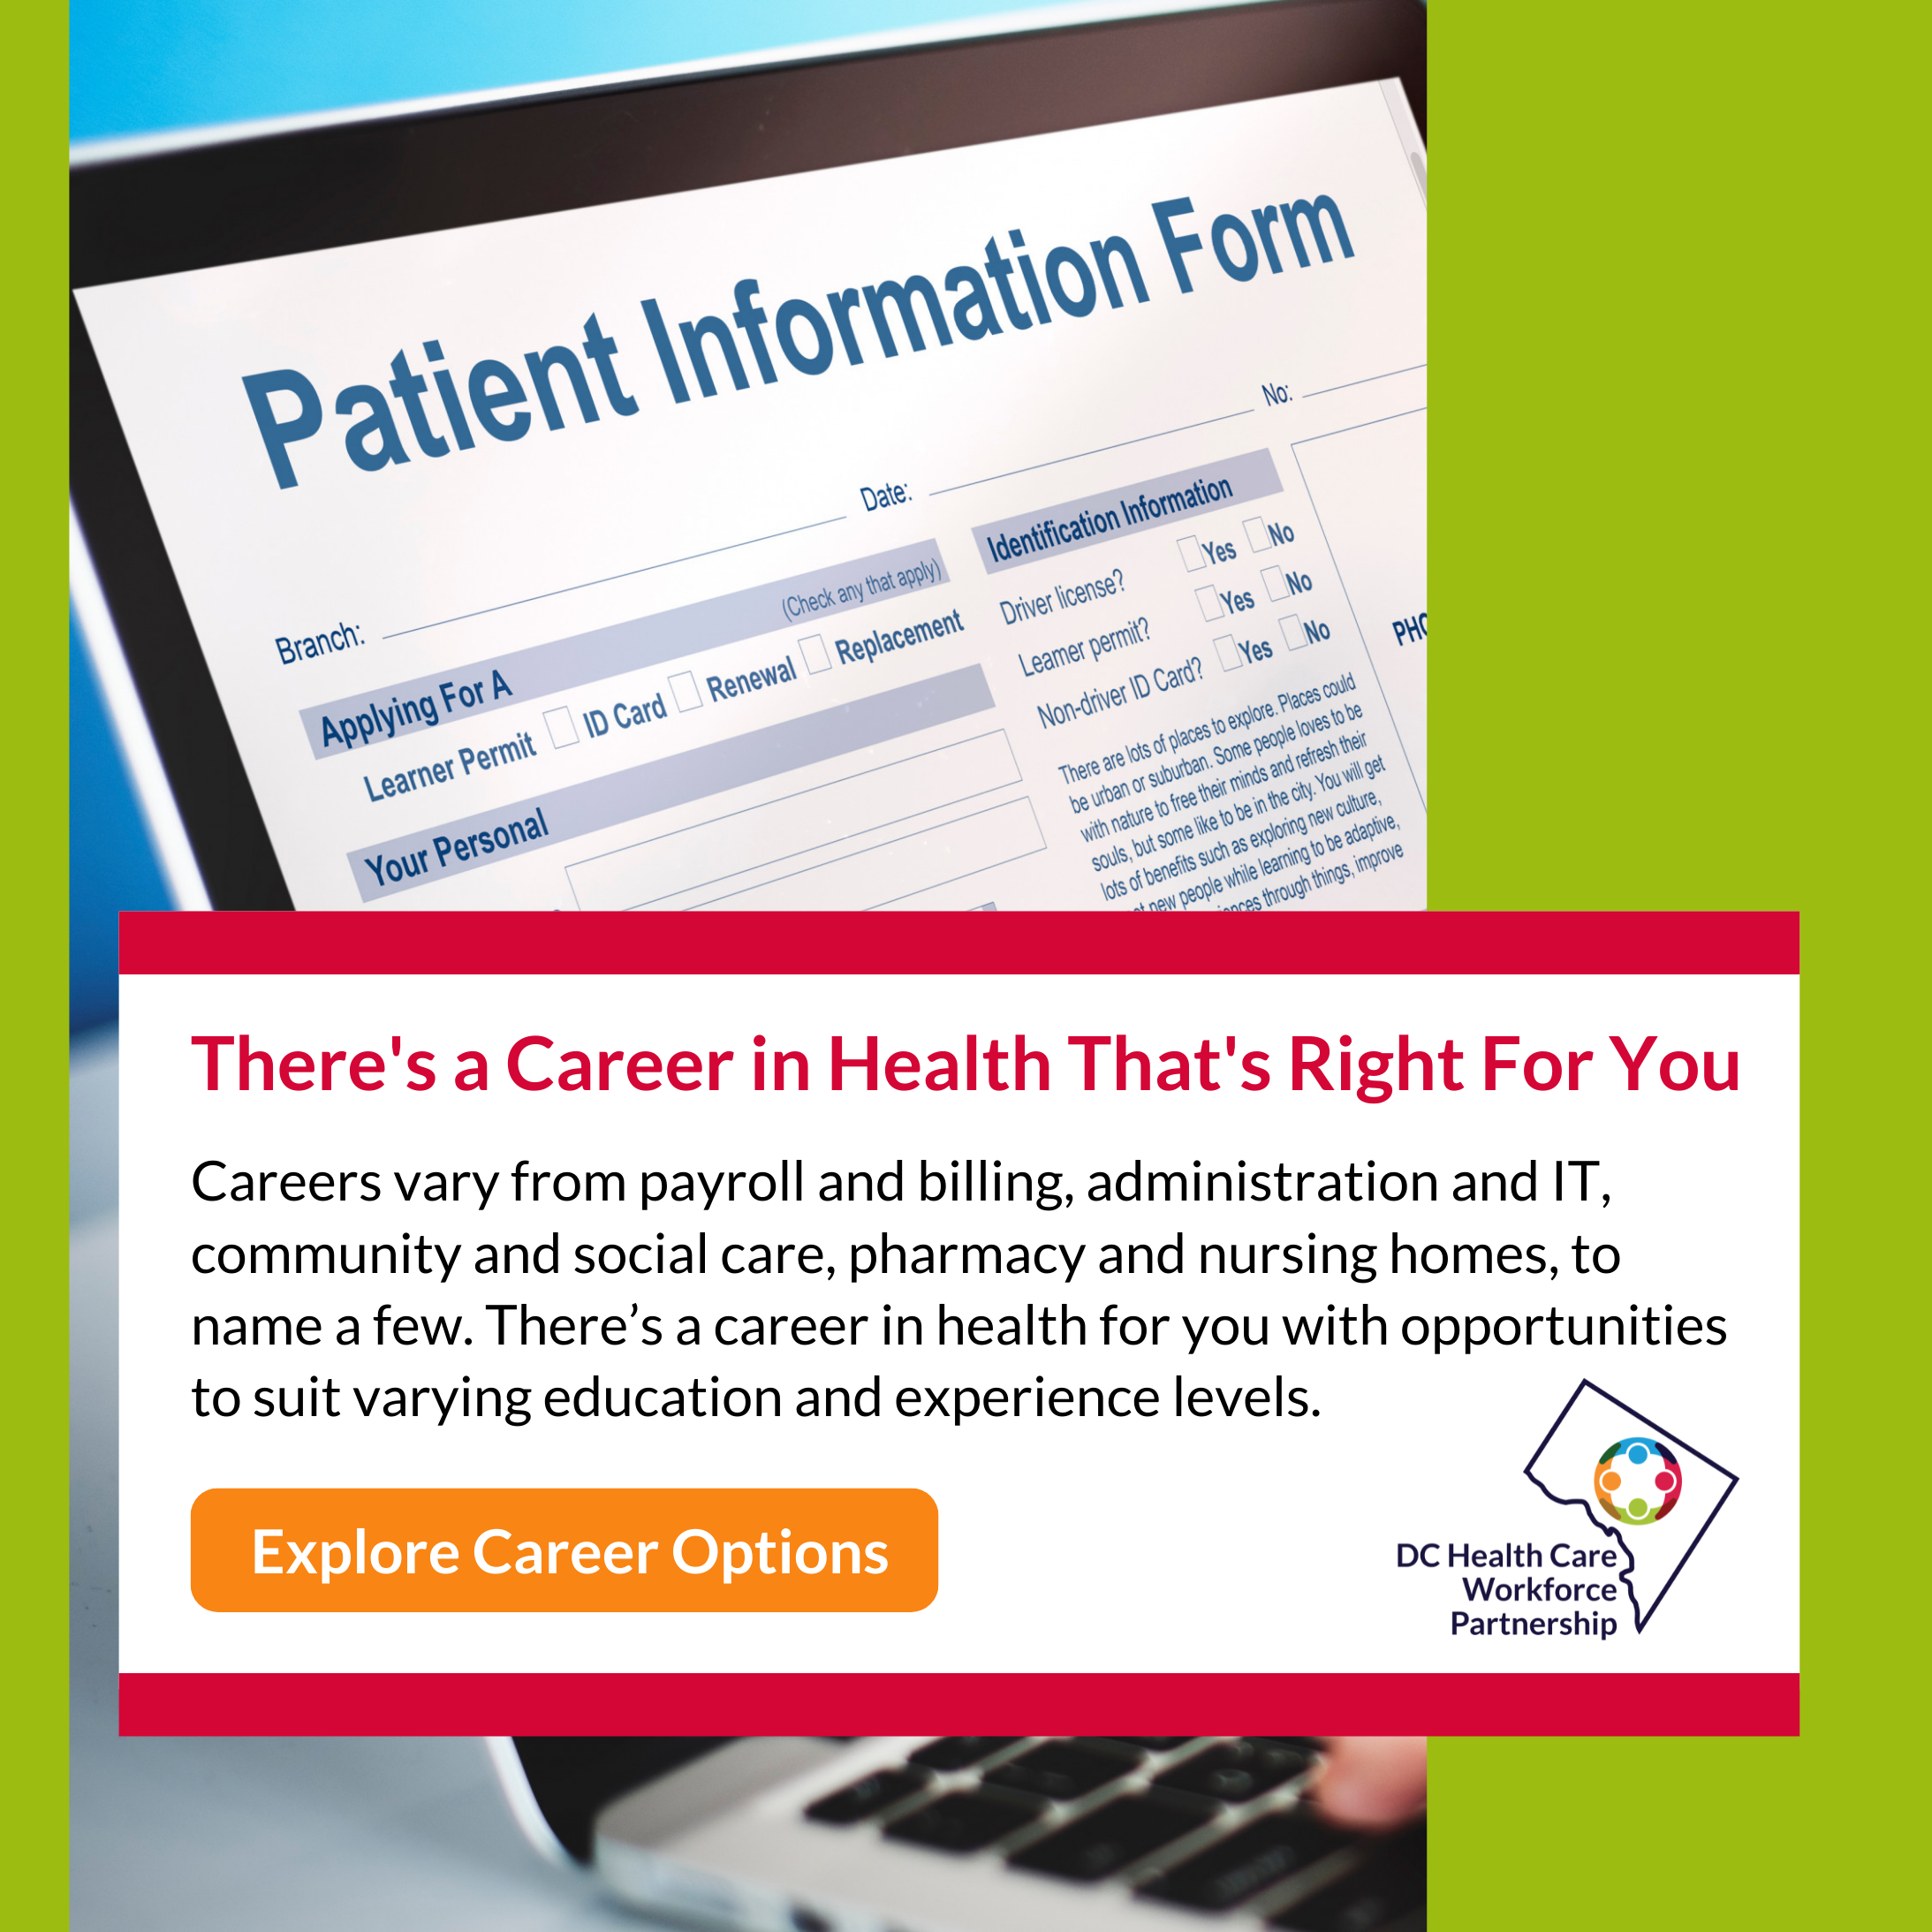 Career in Health Right for You Patient Information